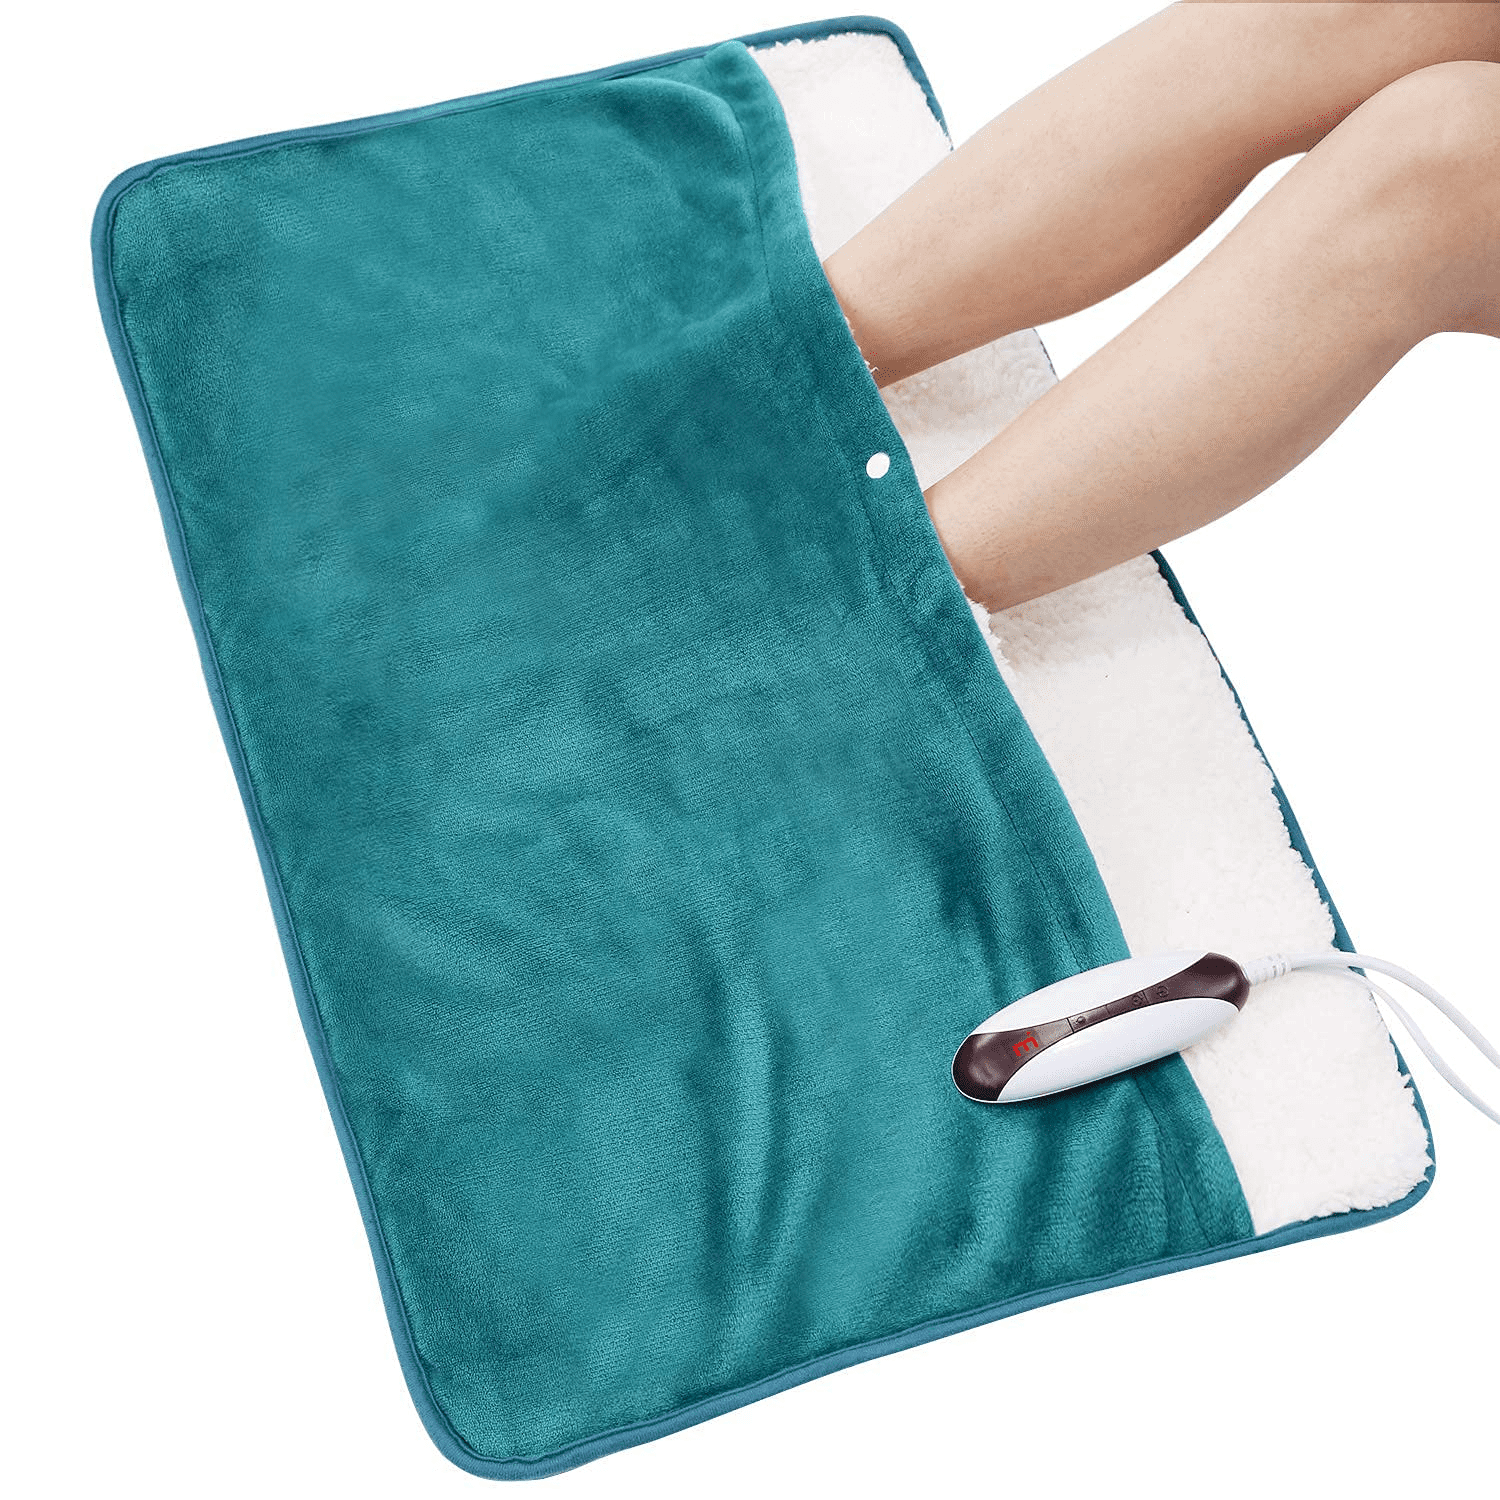 BG Rosy Electric Foot Heater Flannel Heating Pad Cushion for Feet Hands Body 